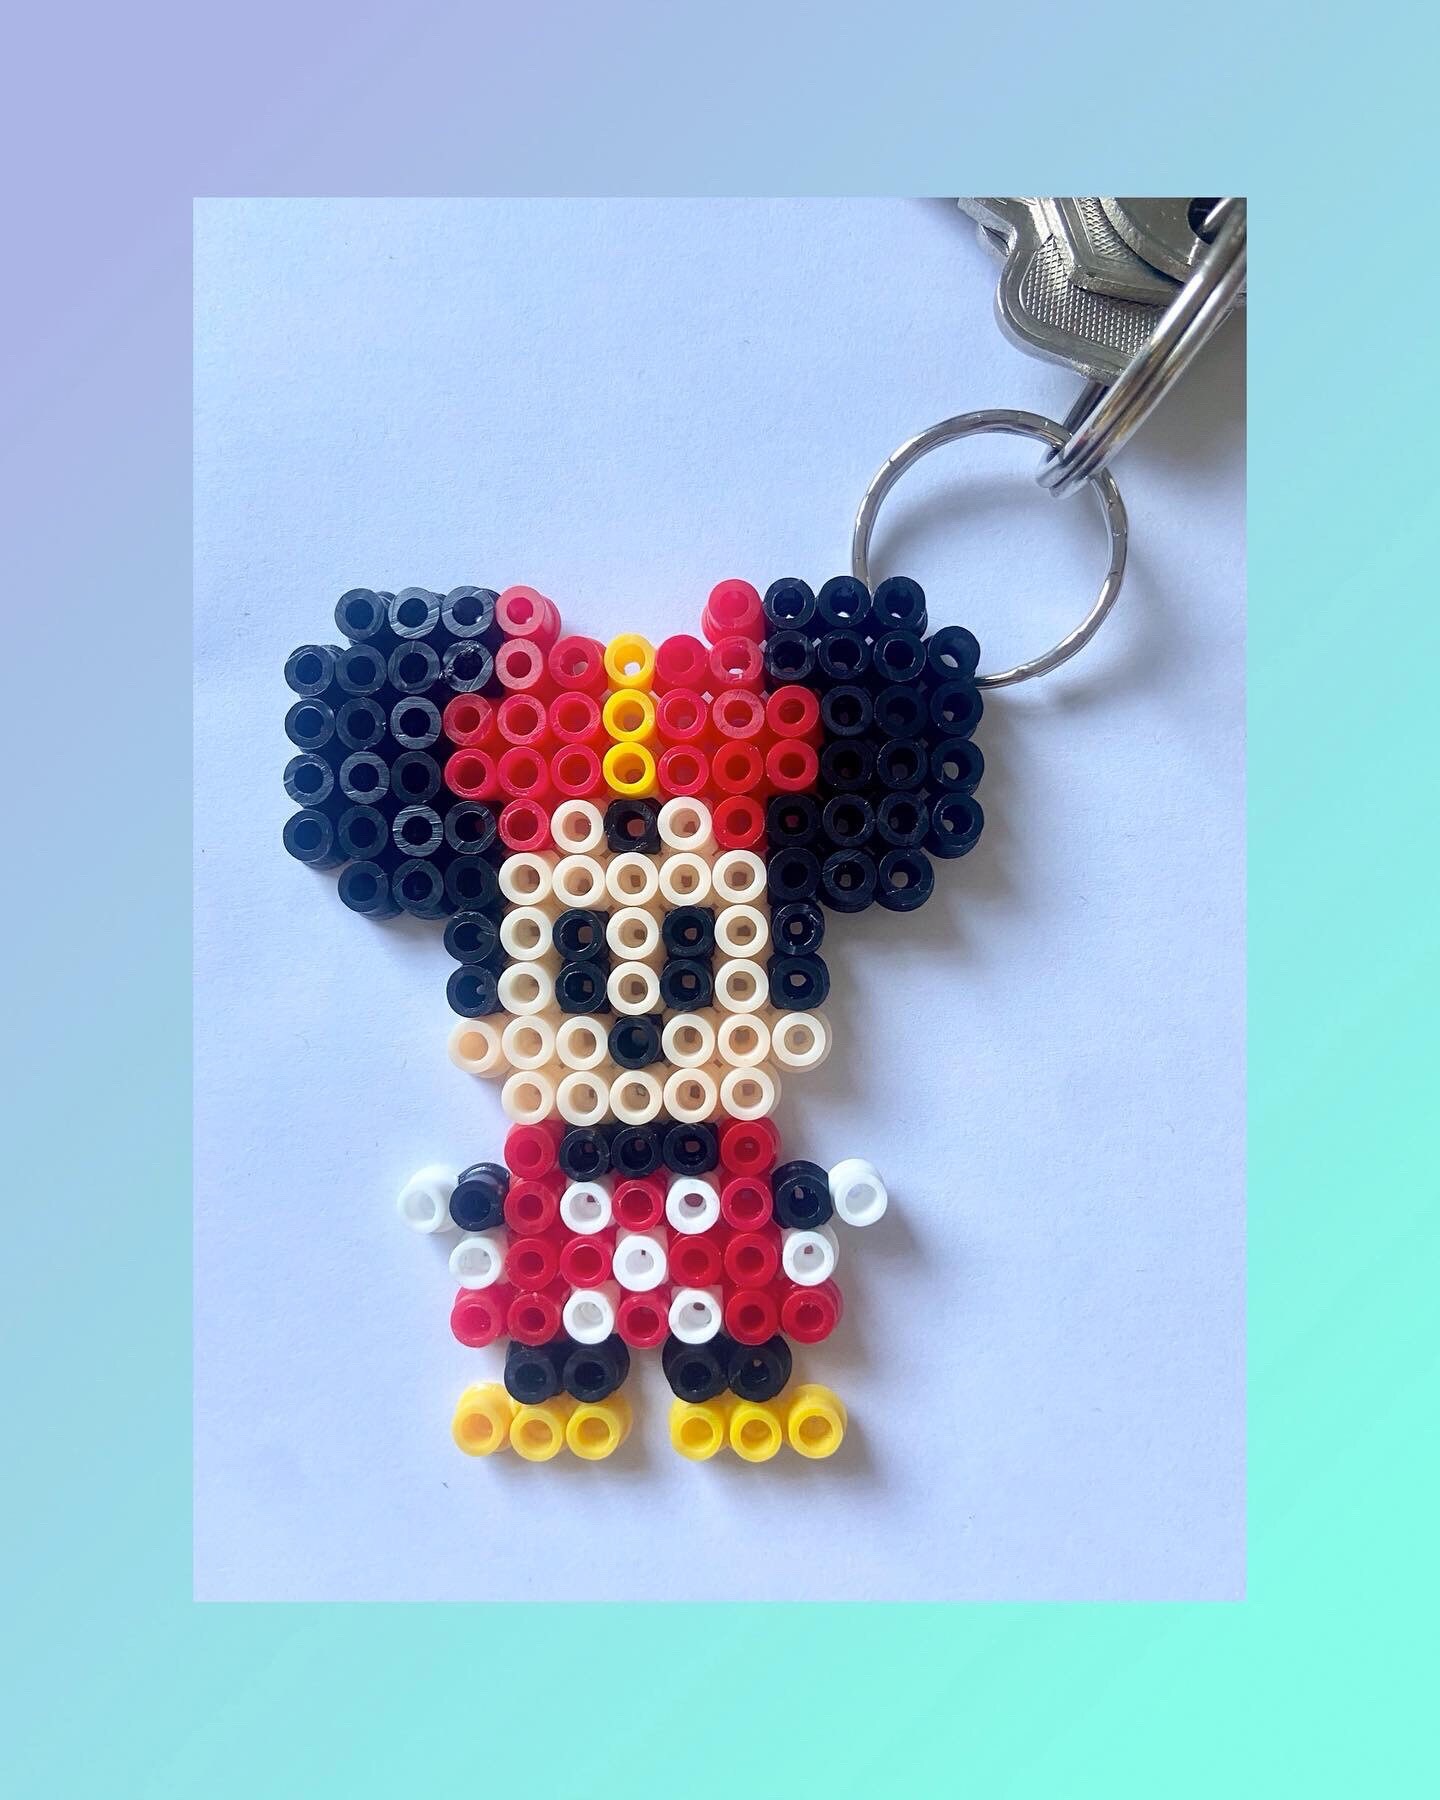 Hama Beads, Mickey Mouse, Minnie Mouse, Design, Pin Badge, Keyring, Magnet,  Hairclip, Necklace, Decoration -  Norway